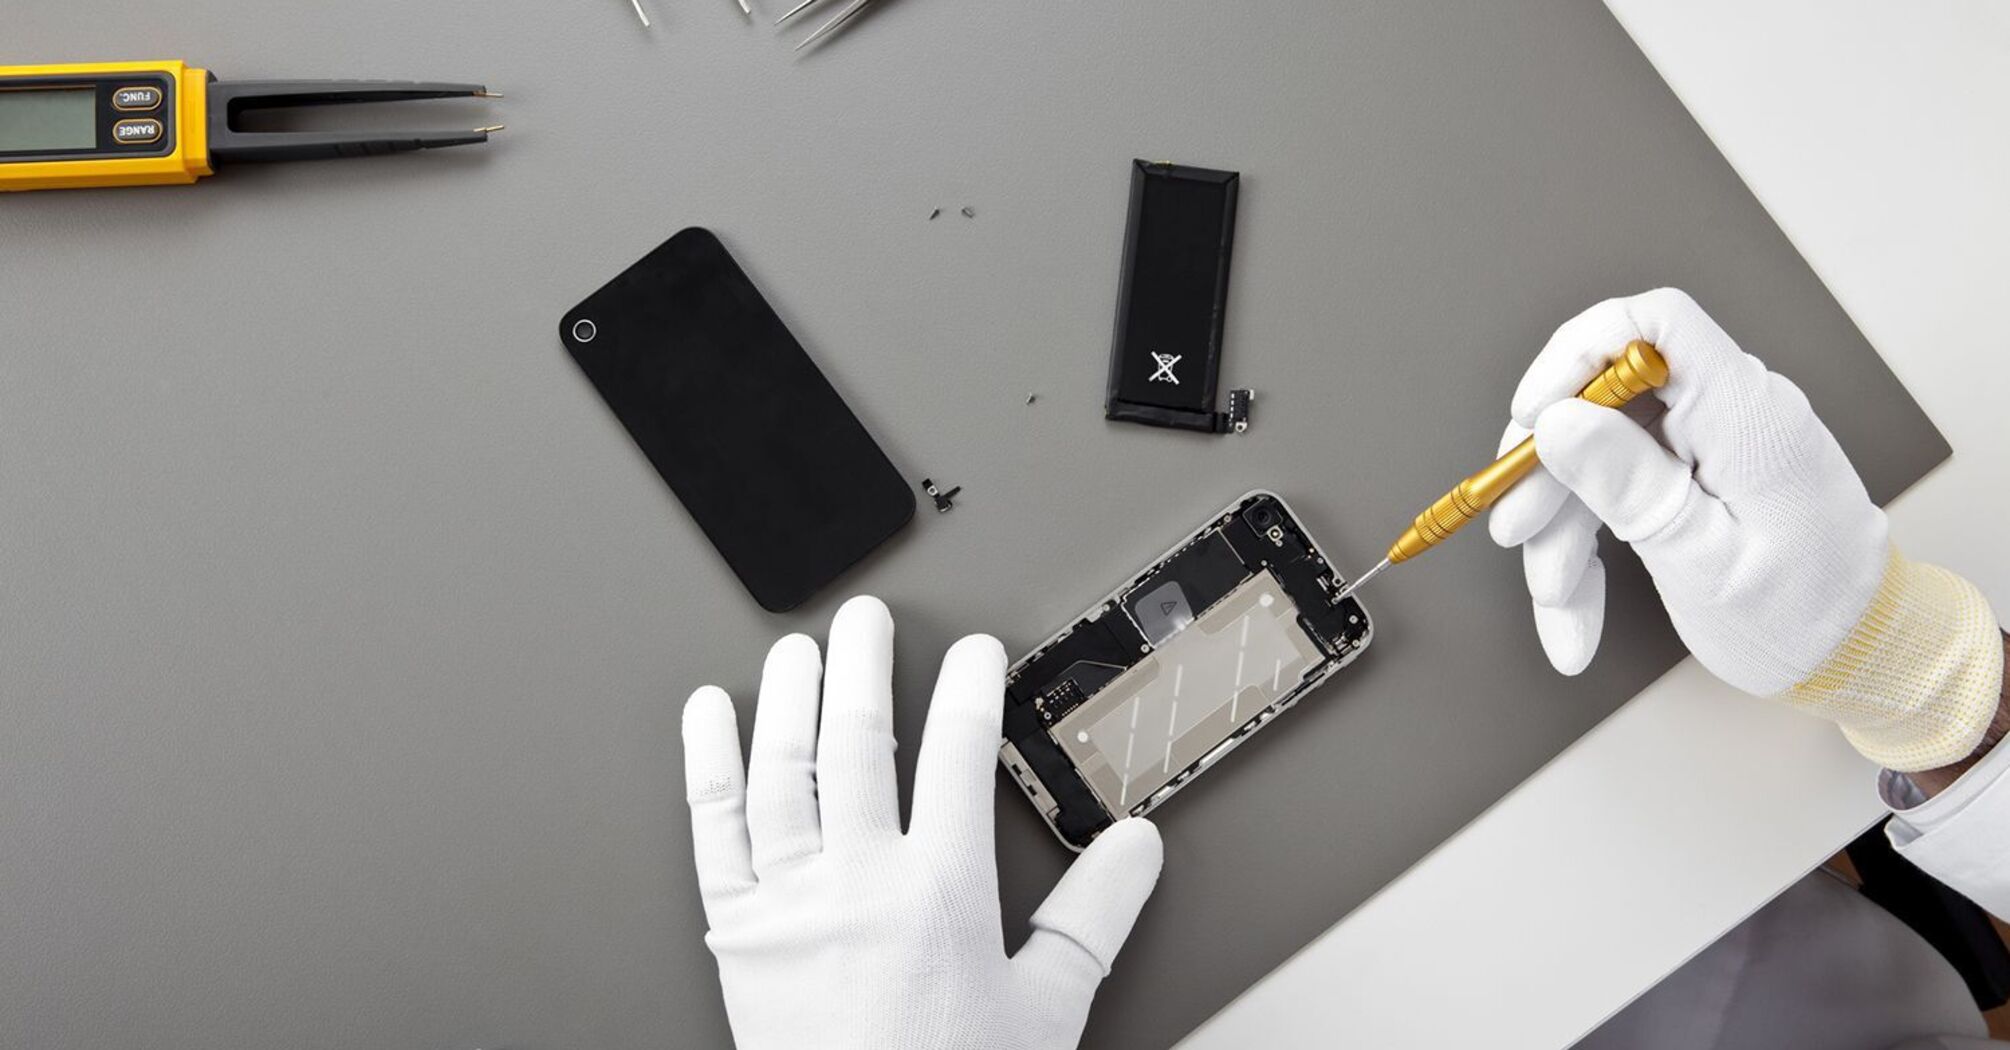 iPhone Battery Replacement